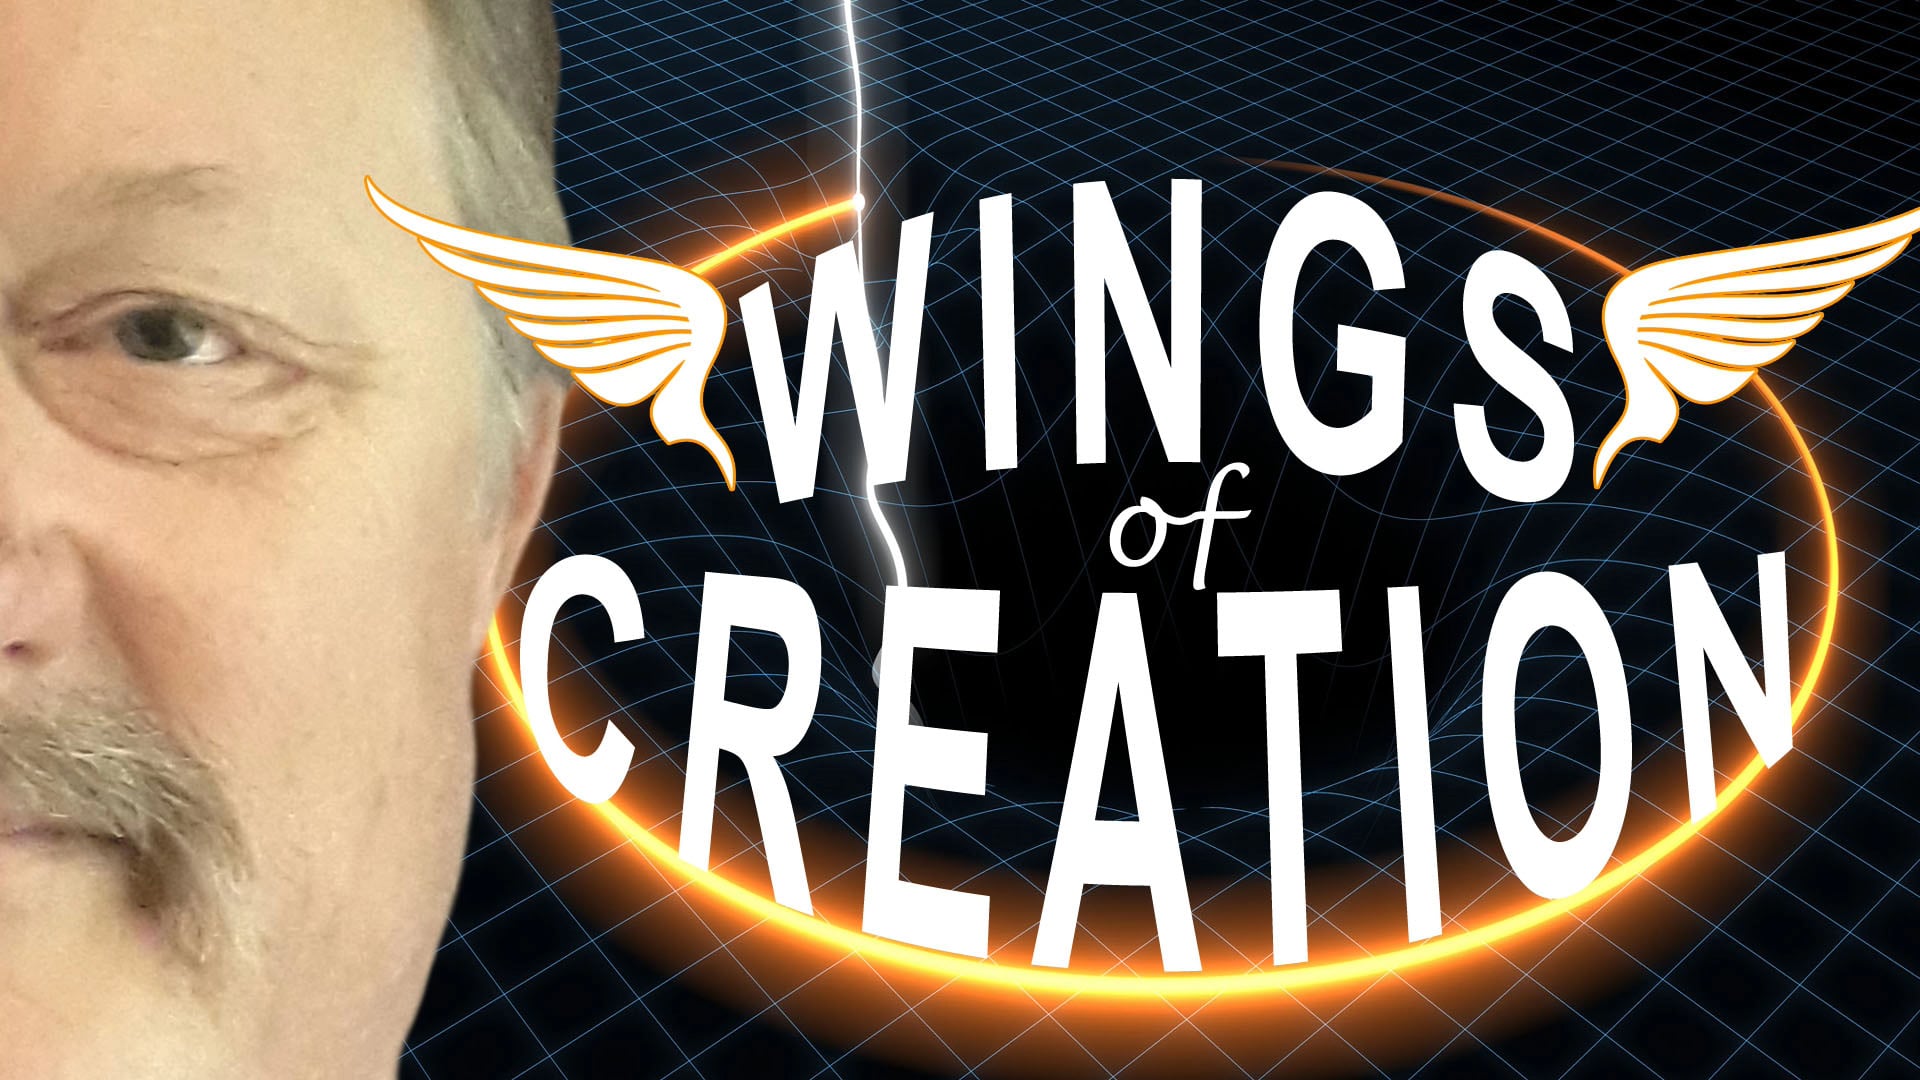 The Wings of Creation: Project Earth